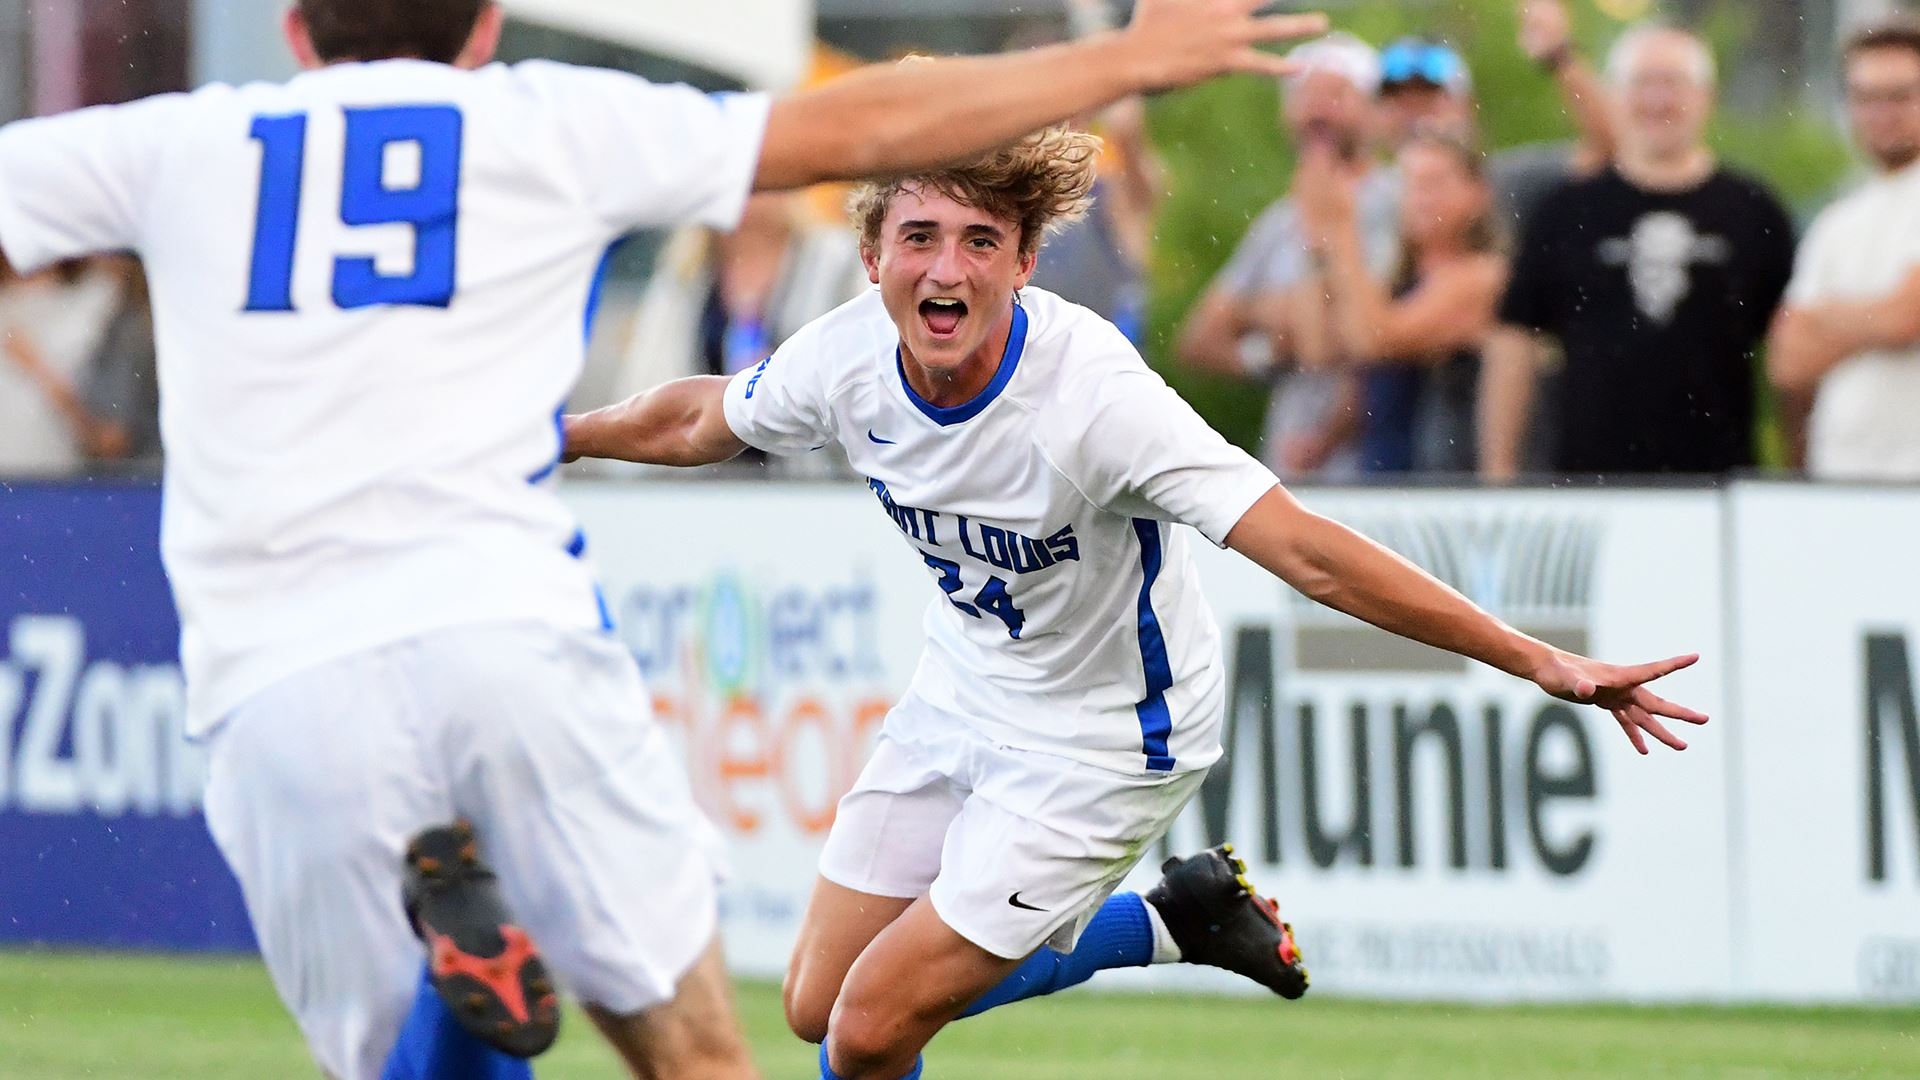 MLS Academy Alumni in College: 2022 Preview